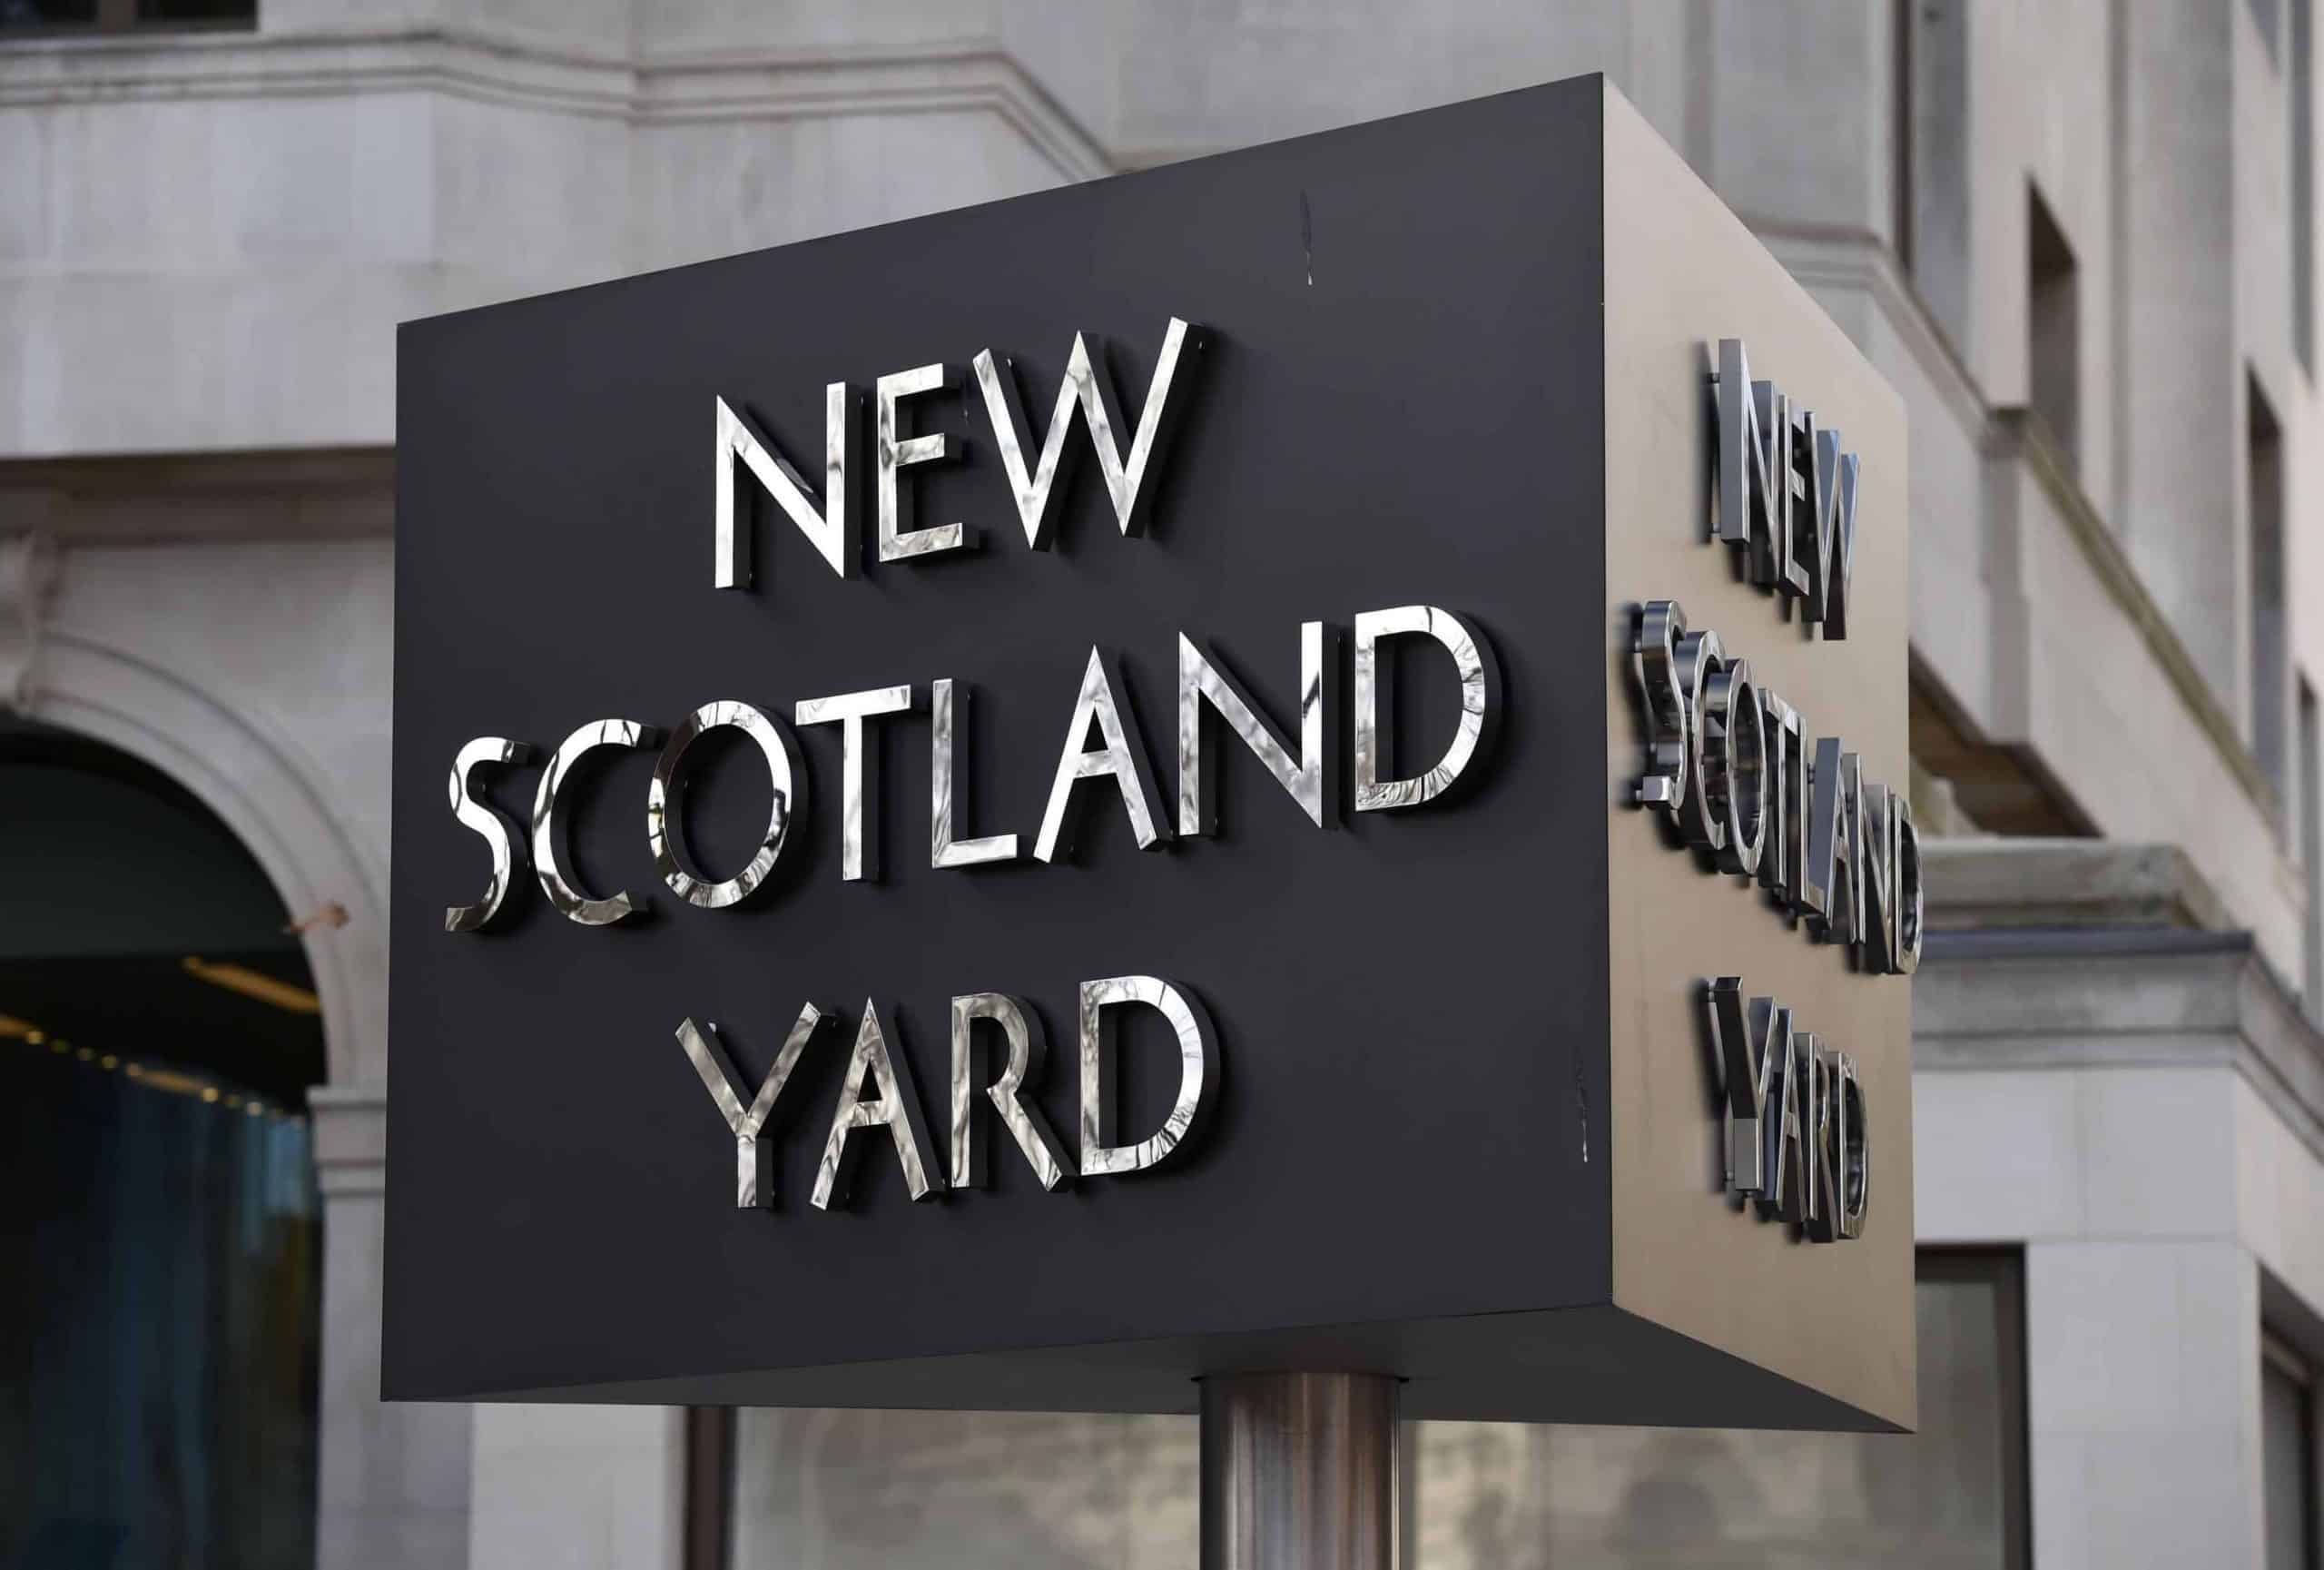 11 out of 14 Met Police strip-searches under investigation involve Black children